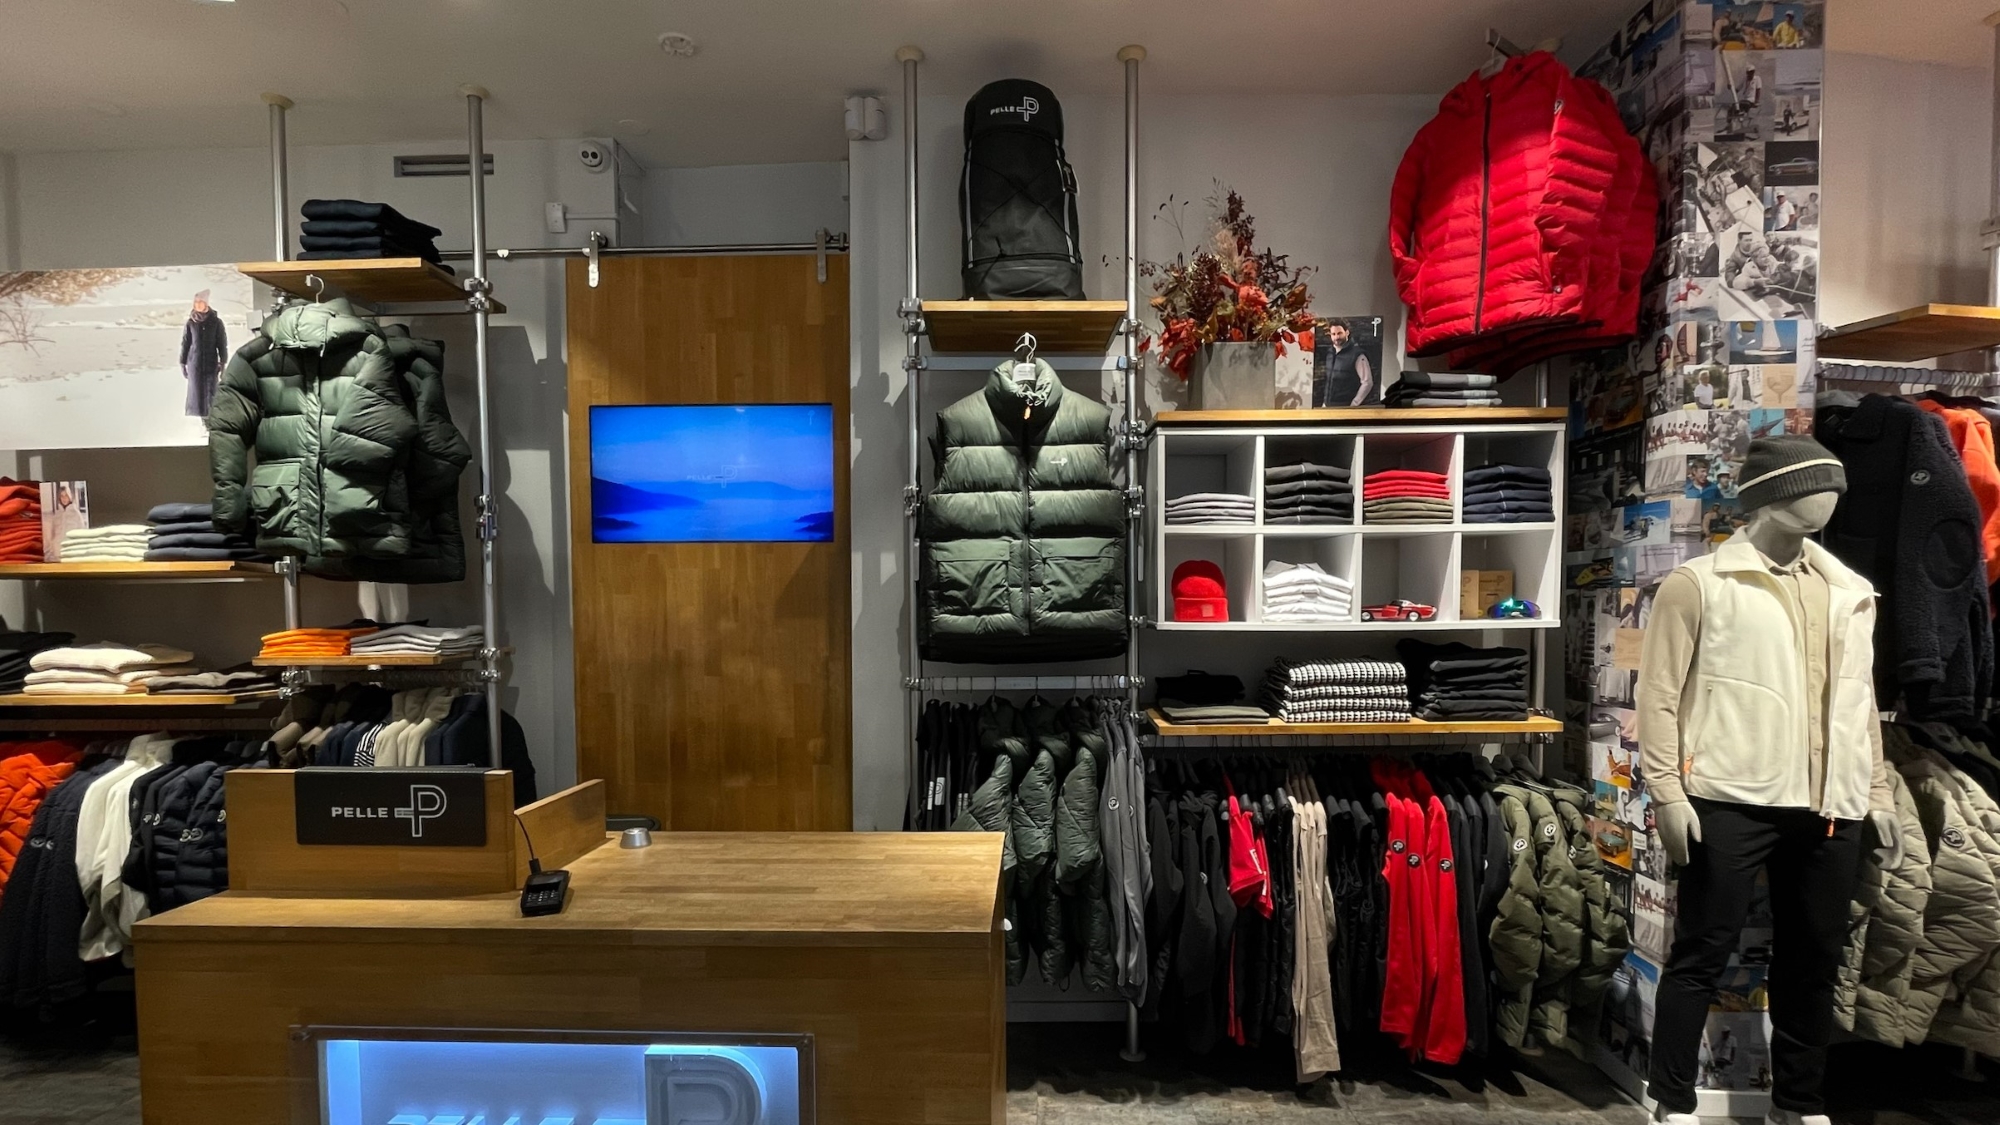 Clothing store with different winter thick jackets, t-shirts, a backpack, and other clothing pieces. There is also the payment counter with a TV in the back and a mannequin on the right side.